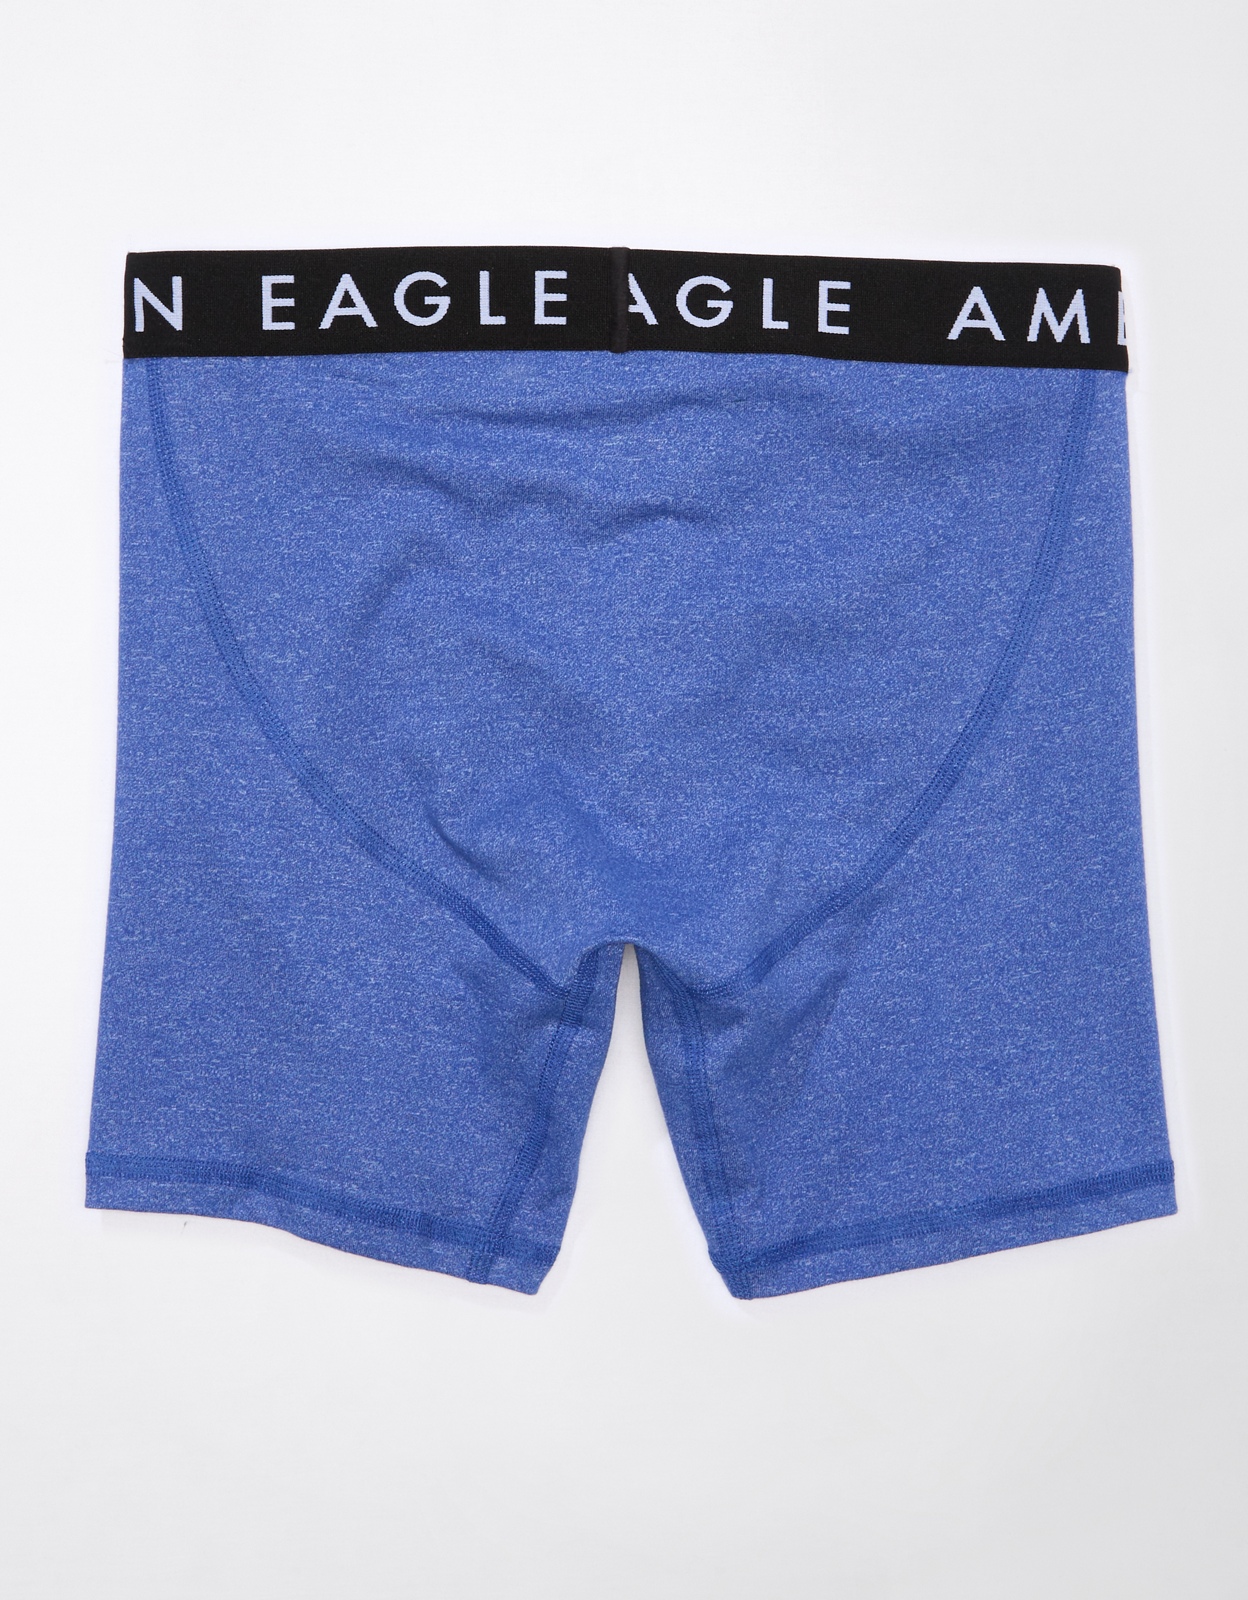 NWOT AMERICAN EAGLE OUTFITTERS MENS AEO FLEX TRUNK SZ Med blue